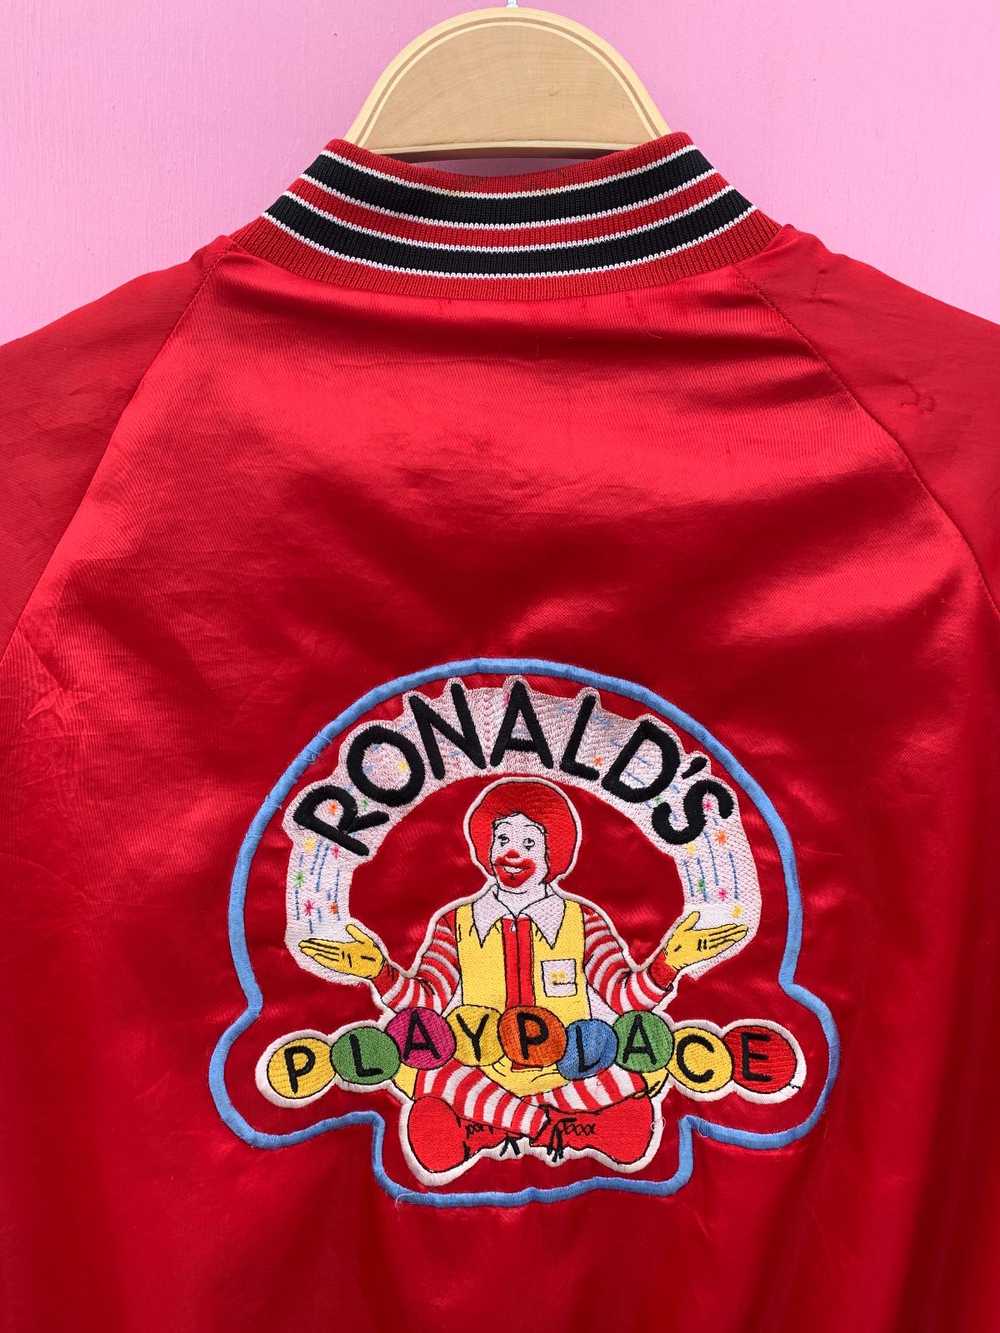 EMBROIDERED RONALDS PLAYPLACE W/ SEQUIN PATCH AND… - image 2